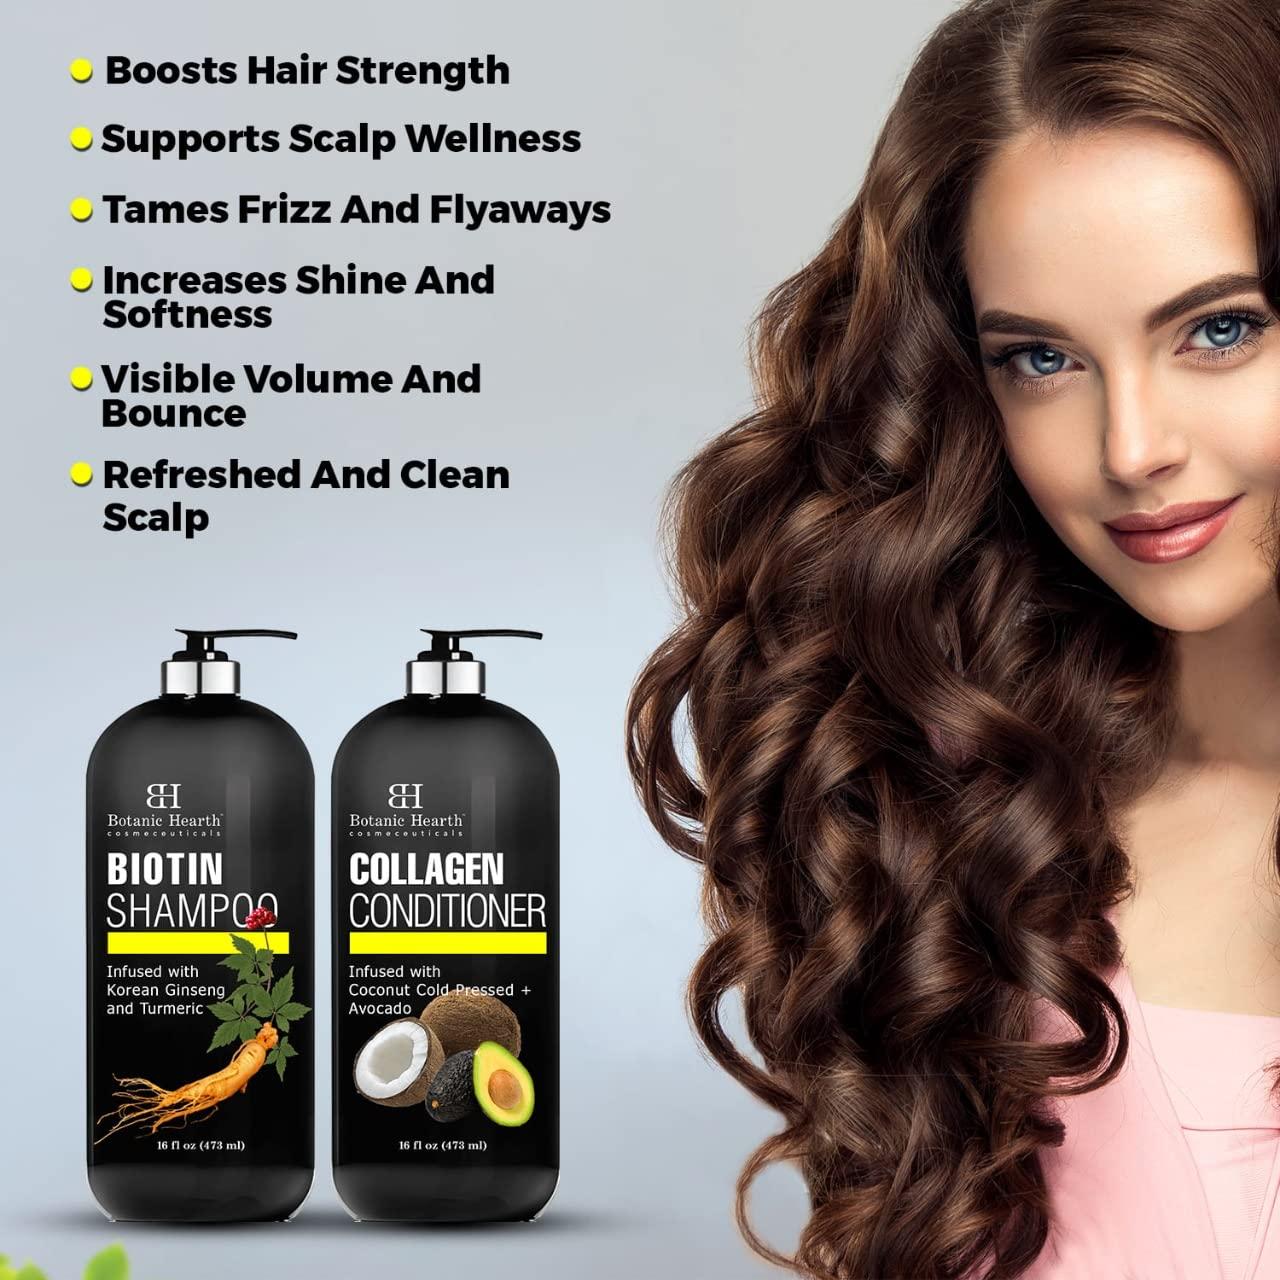 Botanic Hearth Biotin Shampoo and Conditioner with Collagen - Fights Hair  Loss & Thinning with Korean Ginseng & Turmeric, Conditioner Promotes Hair  Growth with Avocado and Coconut - 16 fl oz x 2